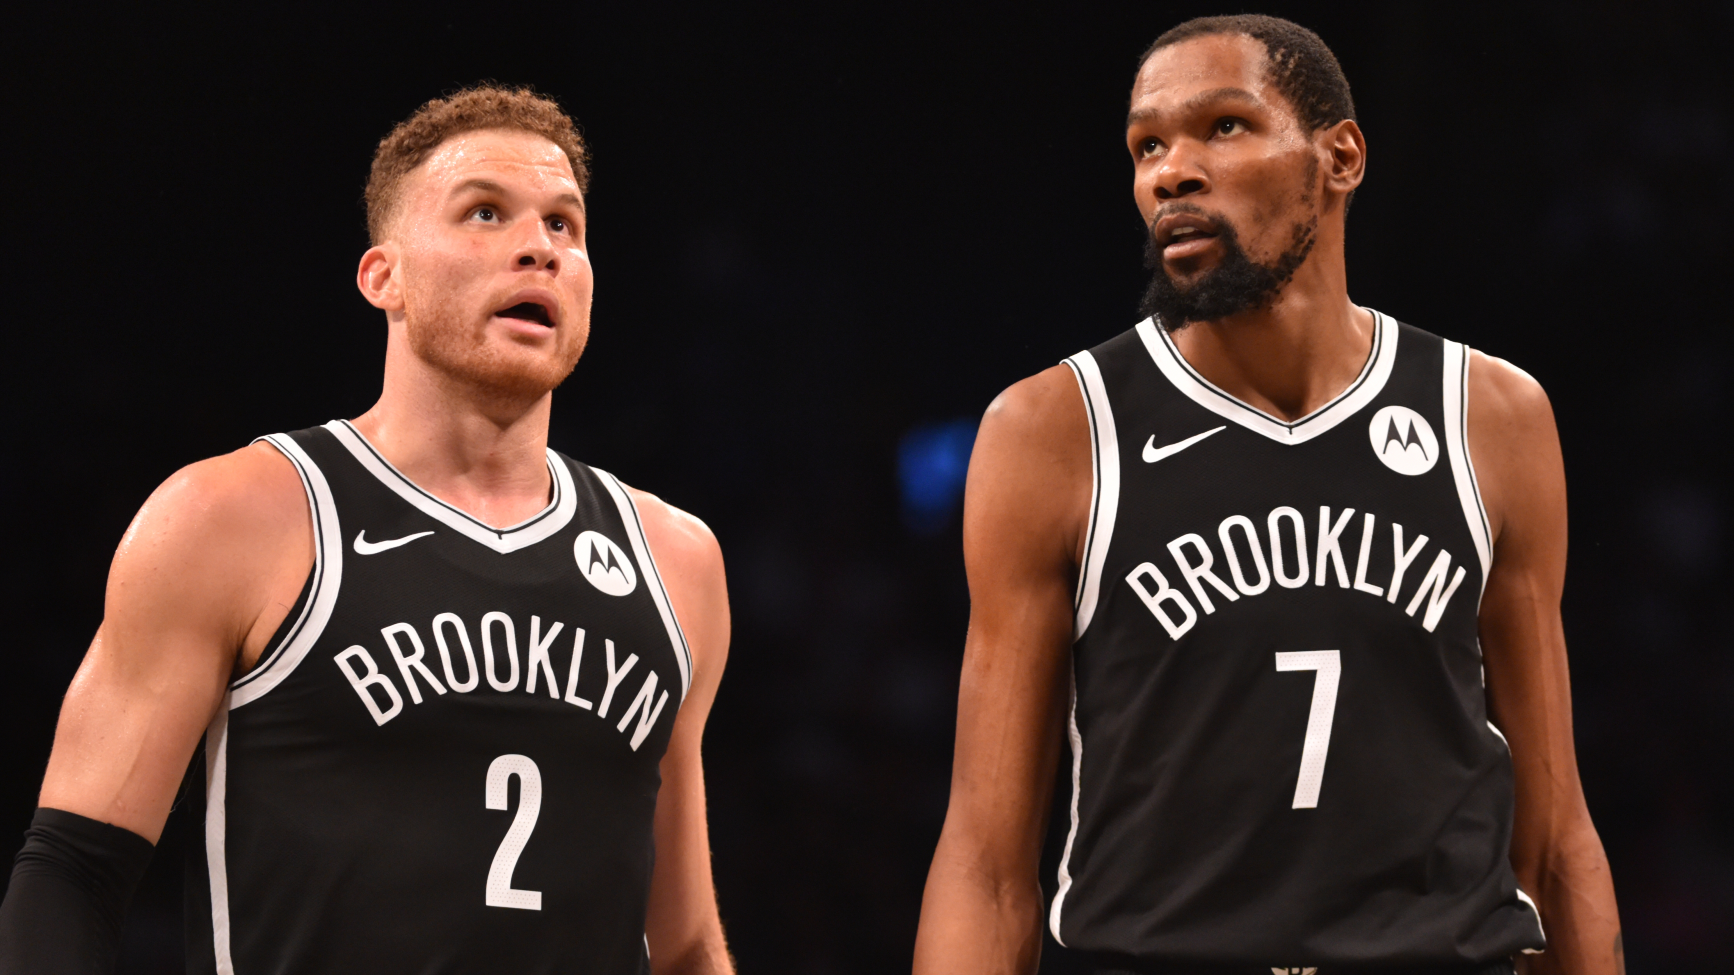 The highly-favoured Brooklyn Nets were eliminated in the Eastern Conference semi-finals and will be among the 2021-22 NBA title favourites.